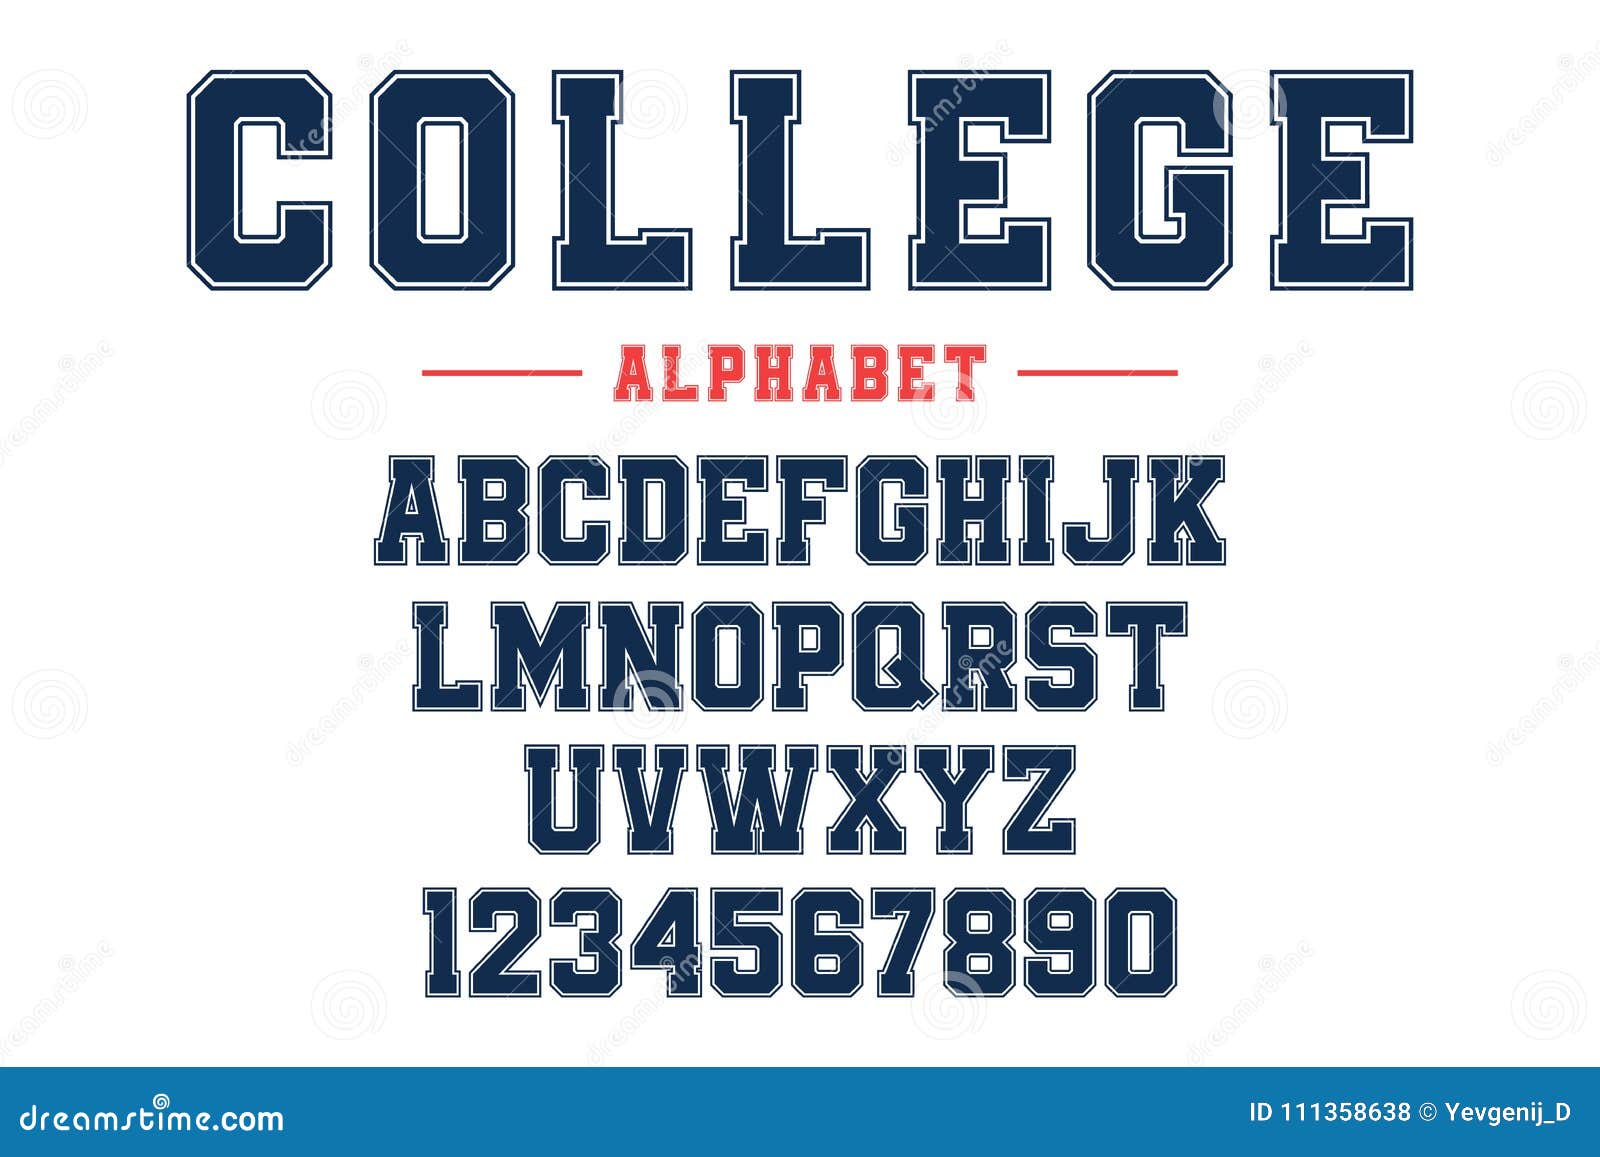 classic college font. vintage sport font in american style for football, baseball or basketball logos and t-shirt